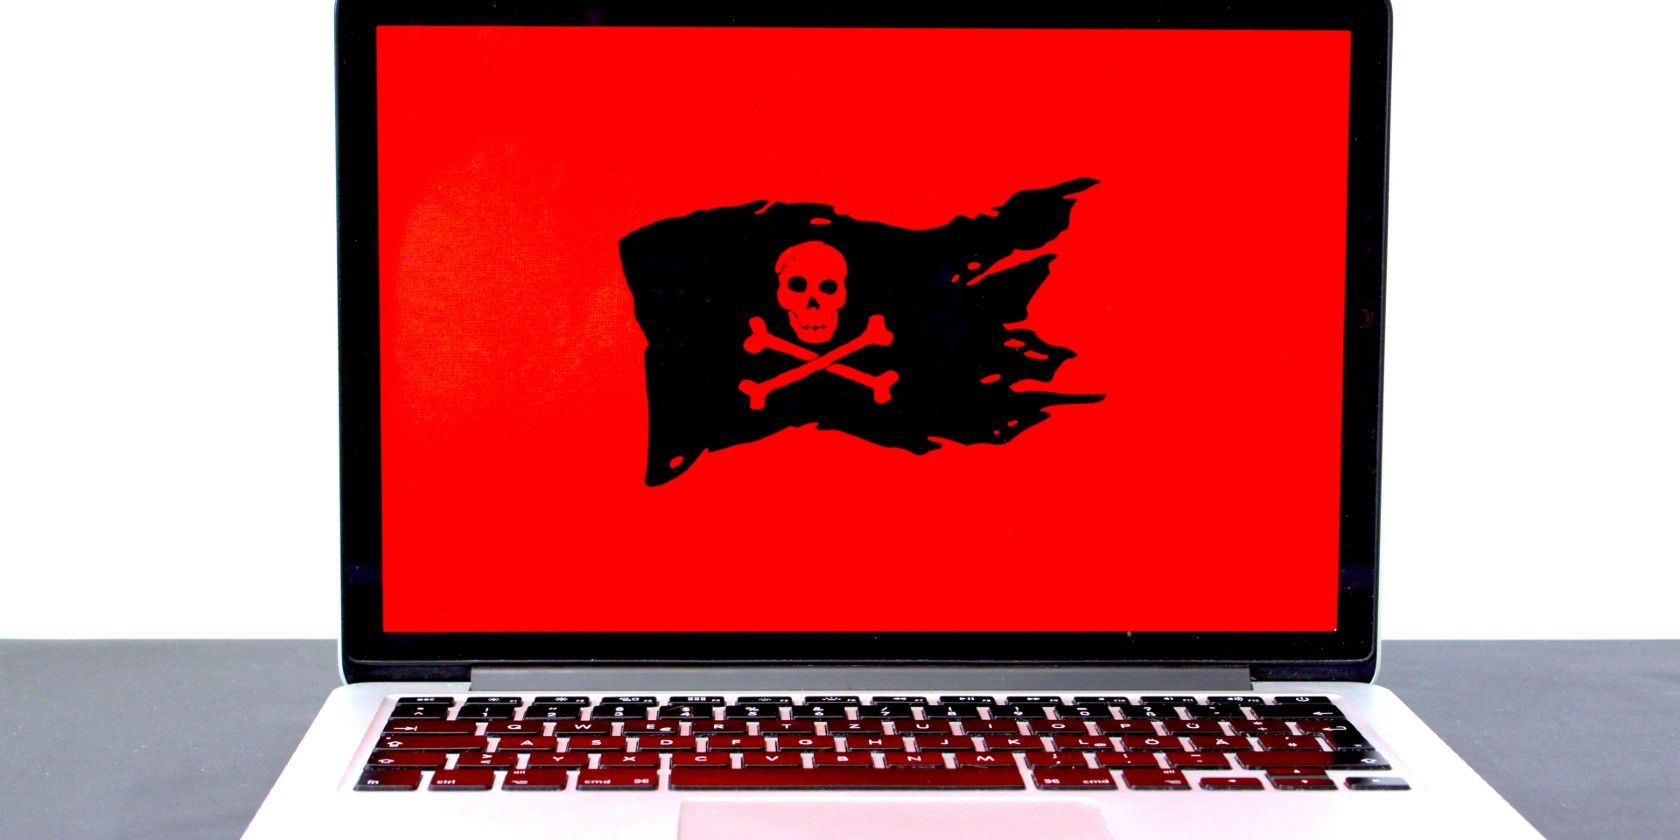 An open laptop with a black pirate flag against a red background on the screen.